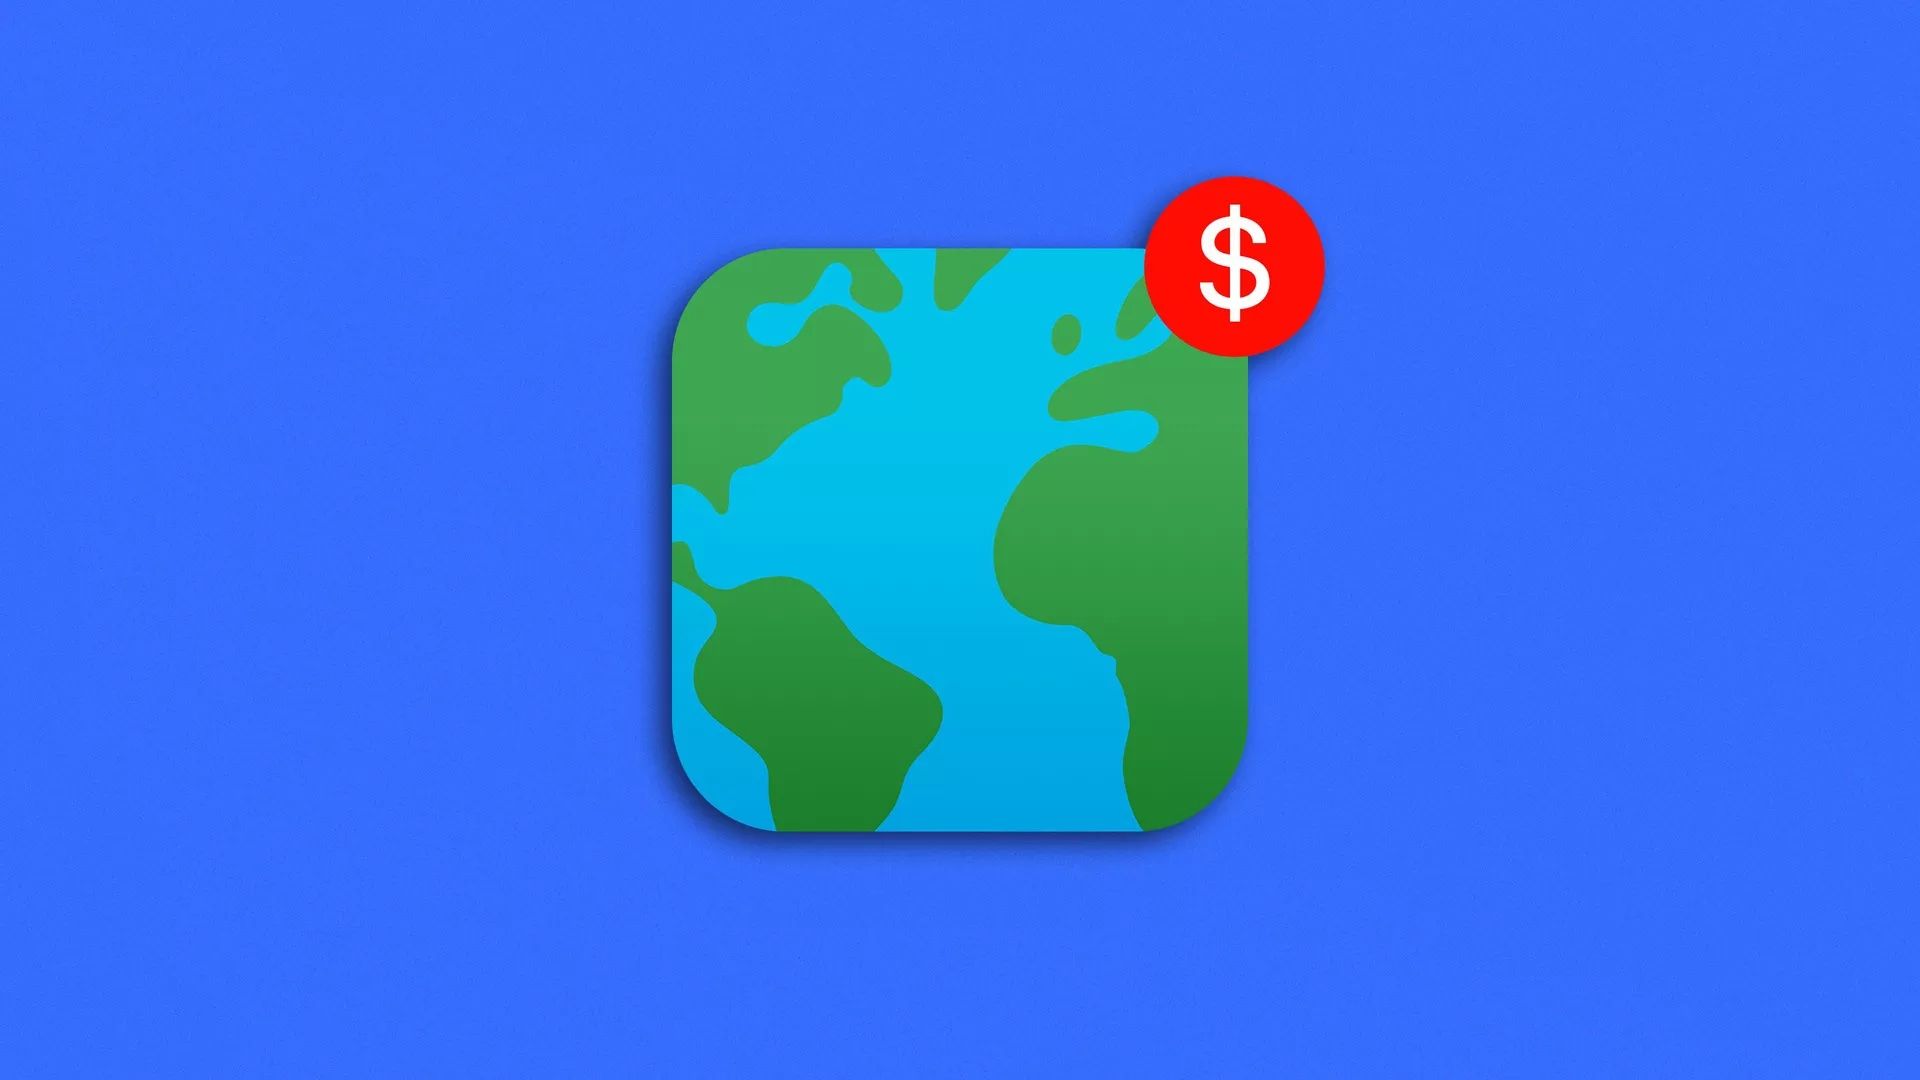 The world as an app with a money sign update icon